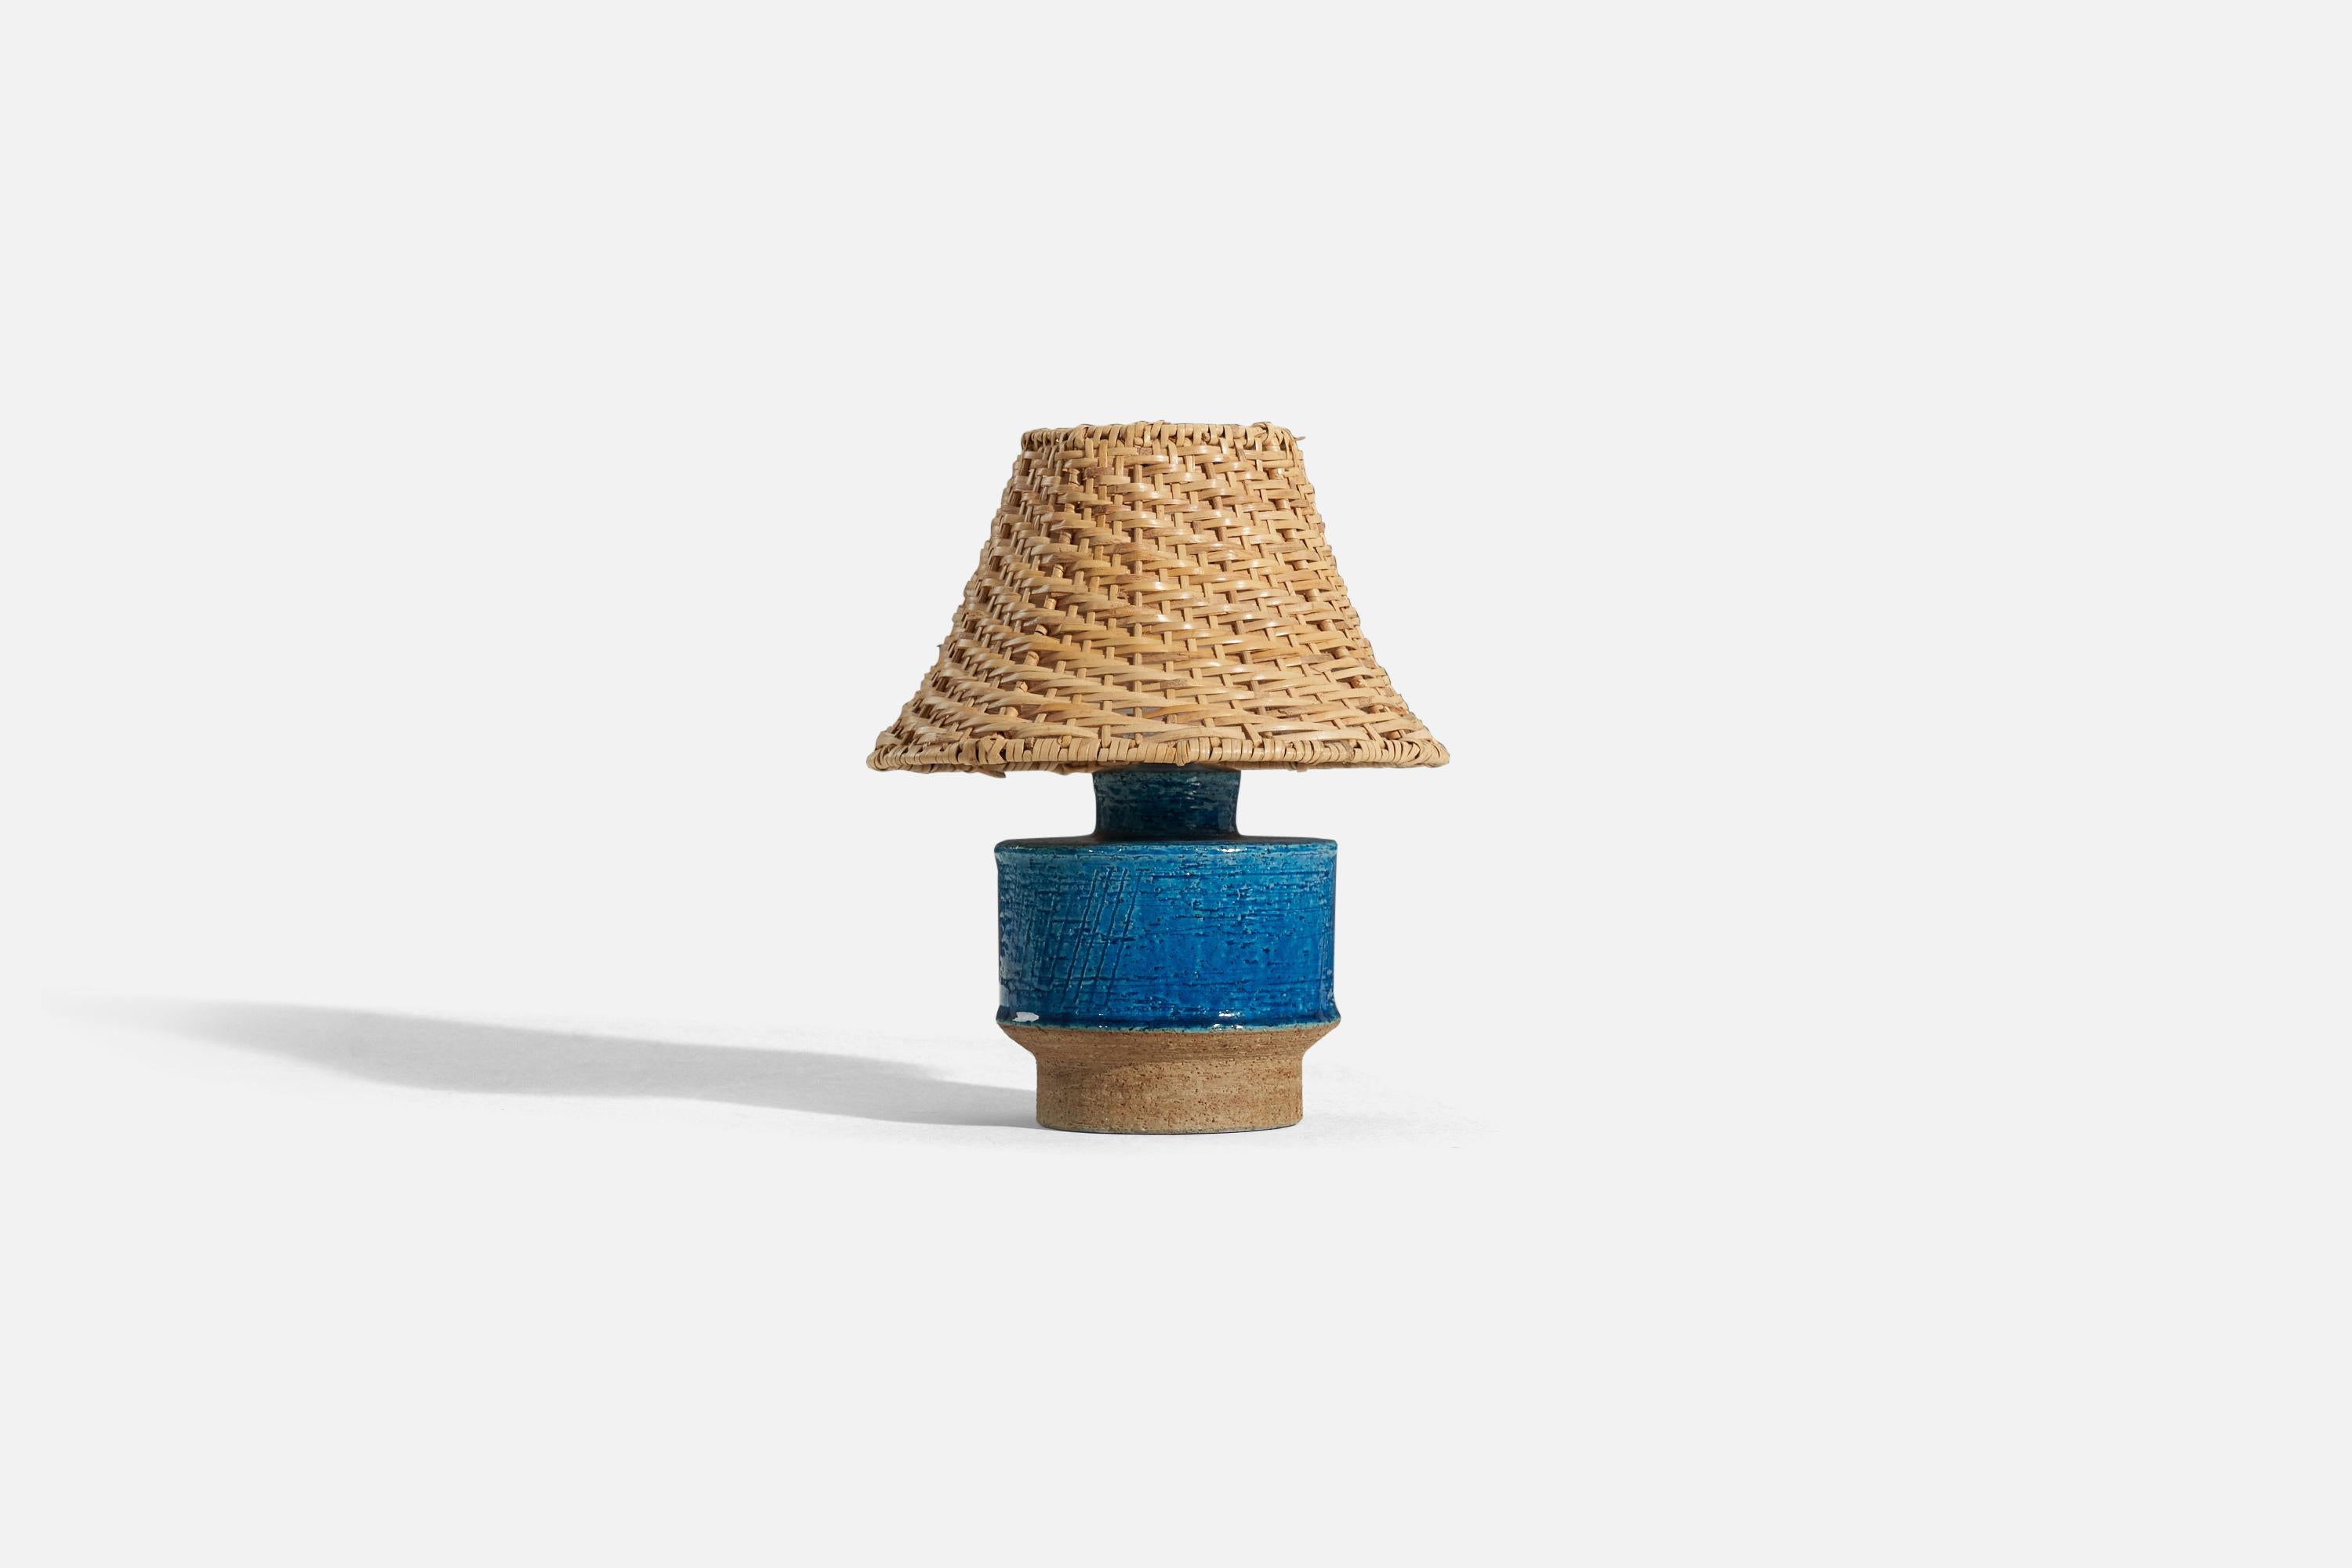 A blue, glazed stoneware table lamp designed by Inger Persson and produced by Rörstrand, Sweden, c. 1960s.

Sold without lampshade. 
Dimensions of Lamp (inches) : 7.625 x 5.0625 x 5.0625 (H x W x D)
Dimensions of Shade (inches) : 4 x 8.75 x 5.5